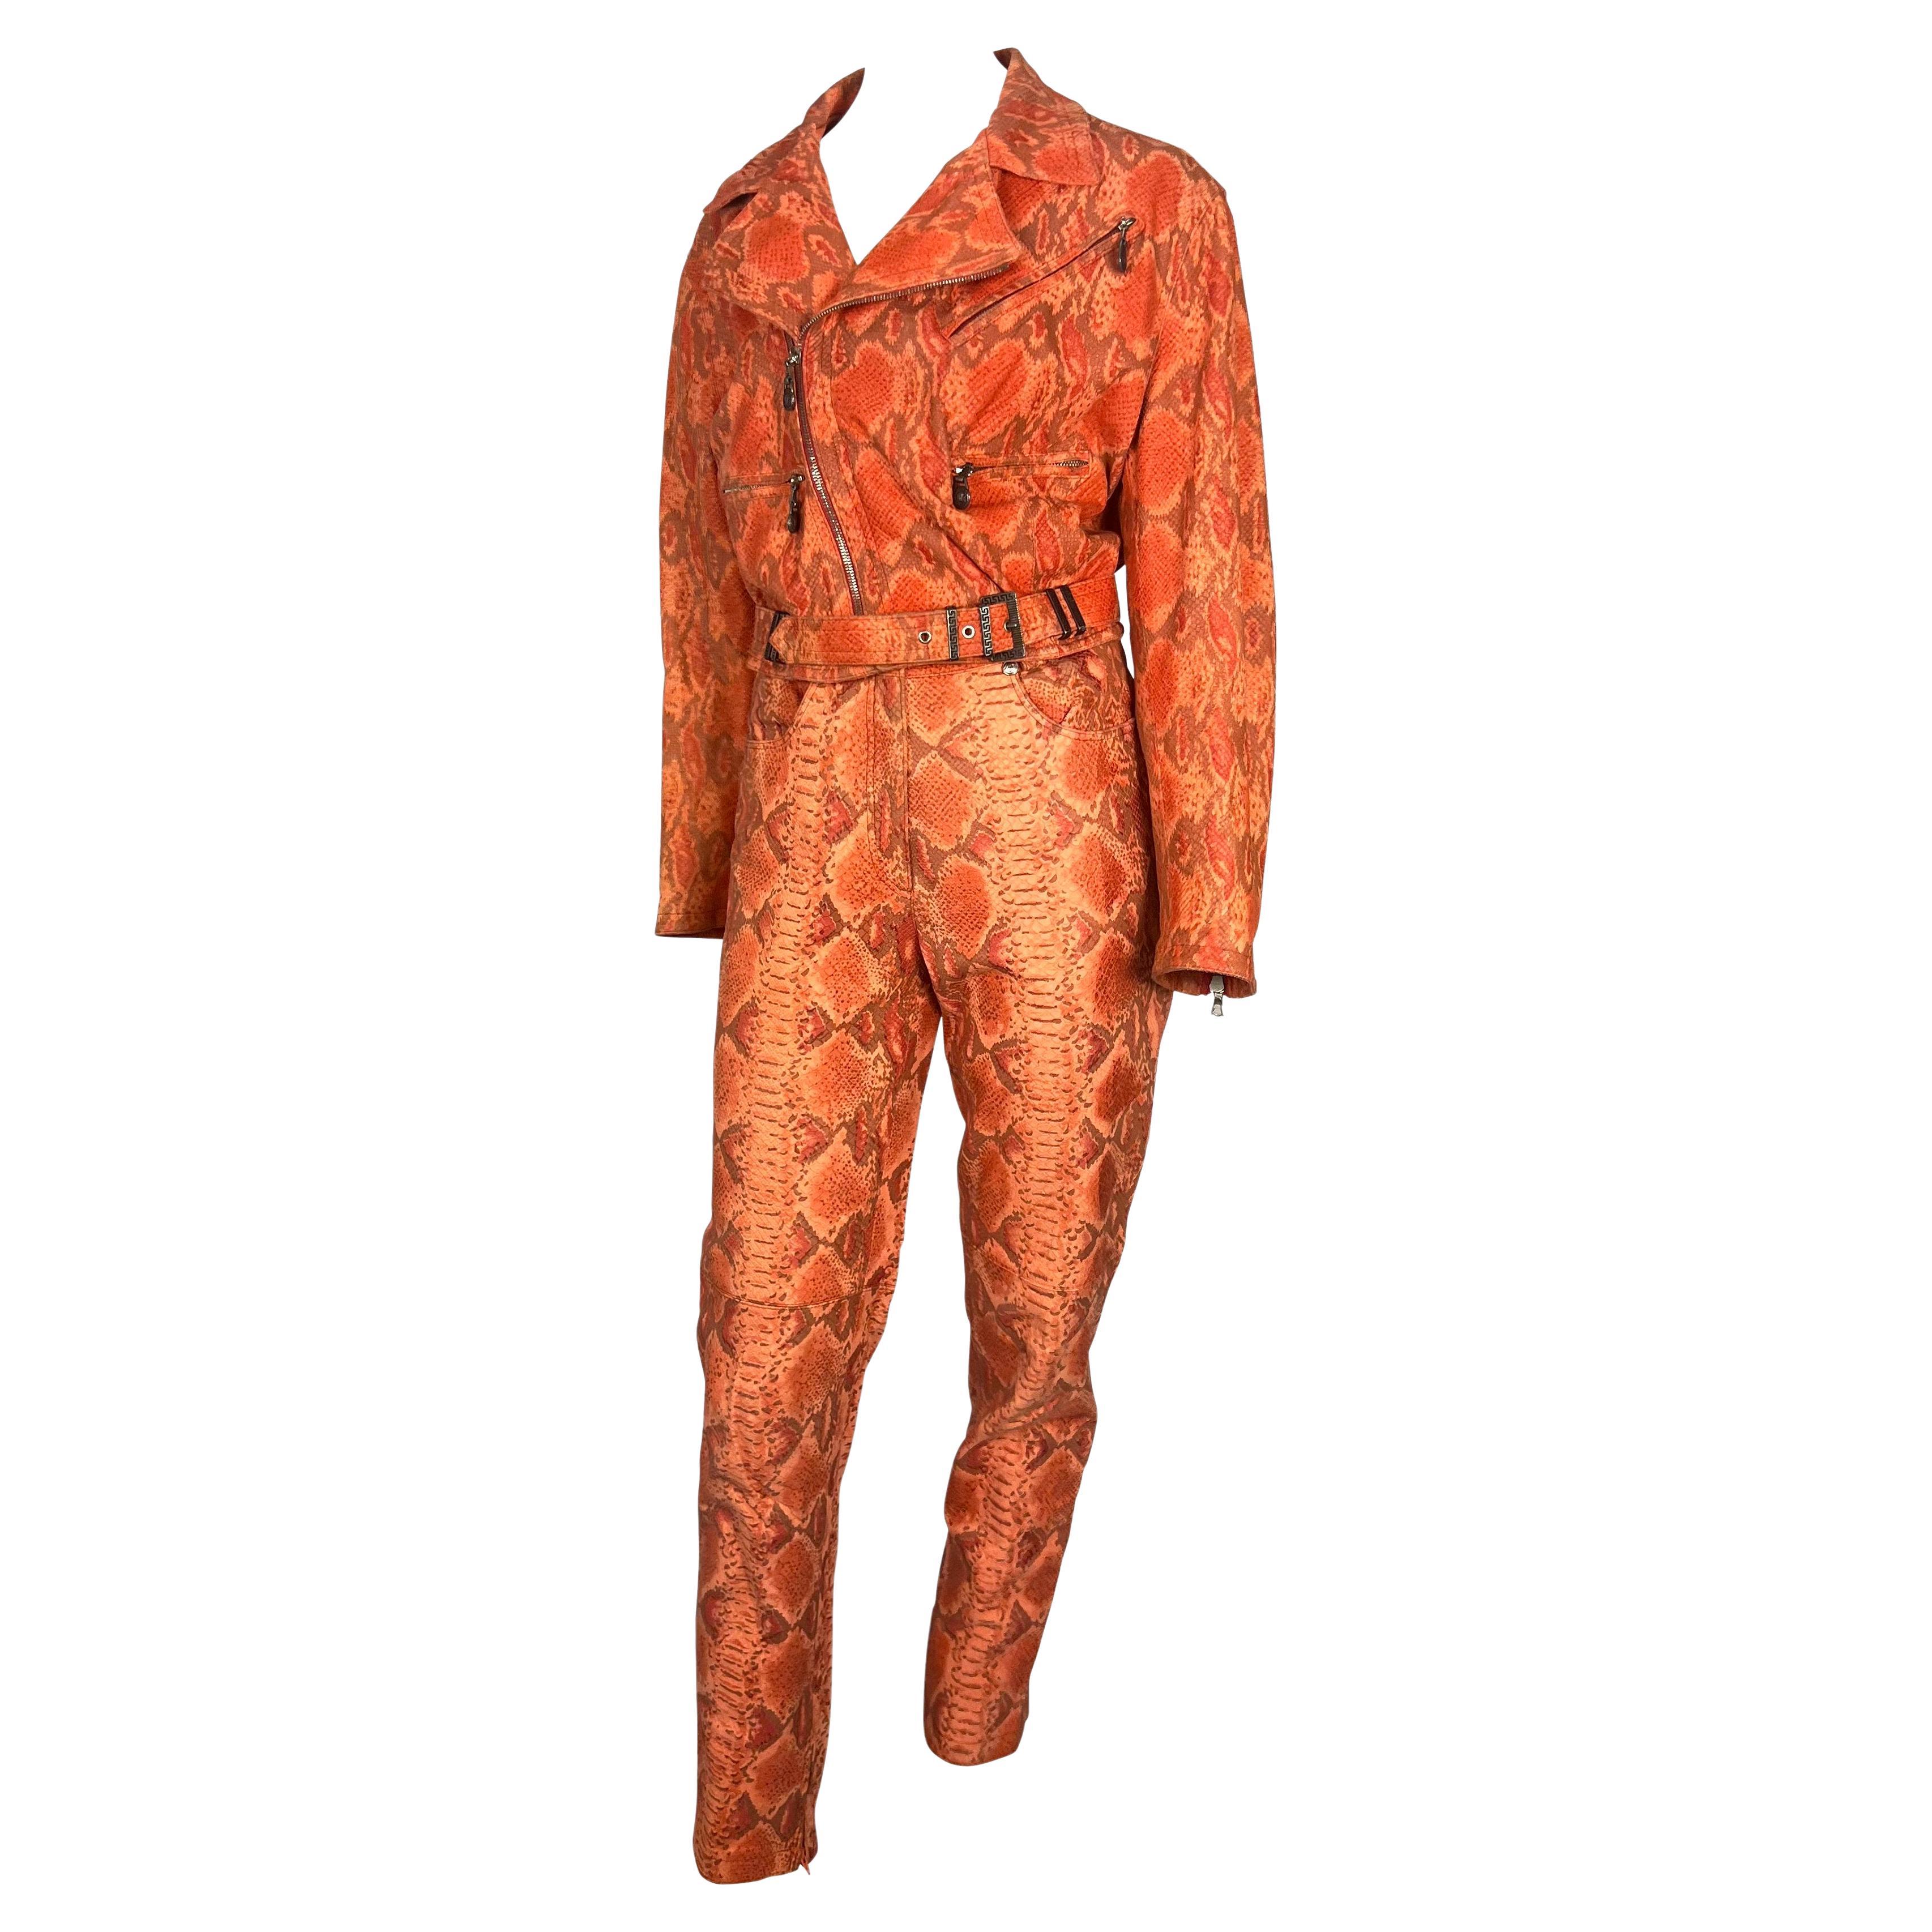 Presenting a fabulous snakeskin-embossed leather pant set, designed by Gianni Versace for his Fall/Winter 1994 collection. The jacket from this set debuted in several colors on the season's runway. This rare set is covered in orange and red